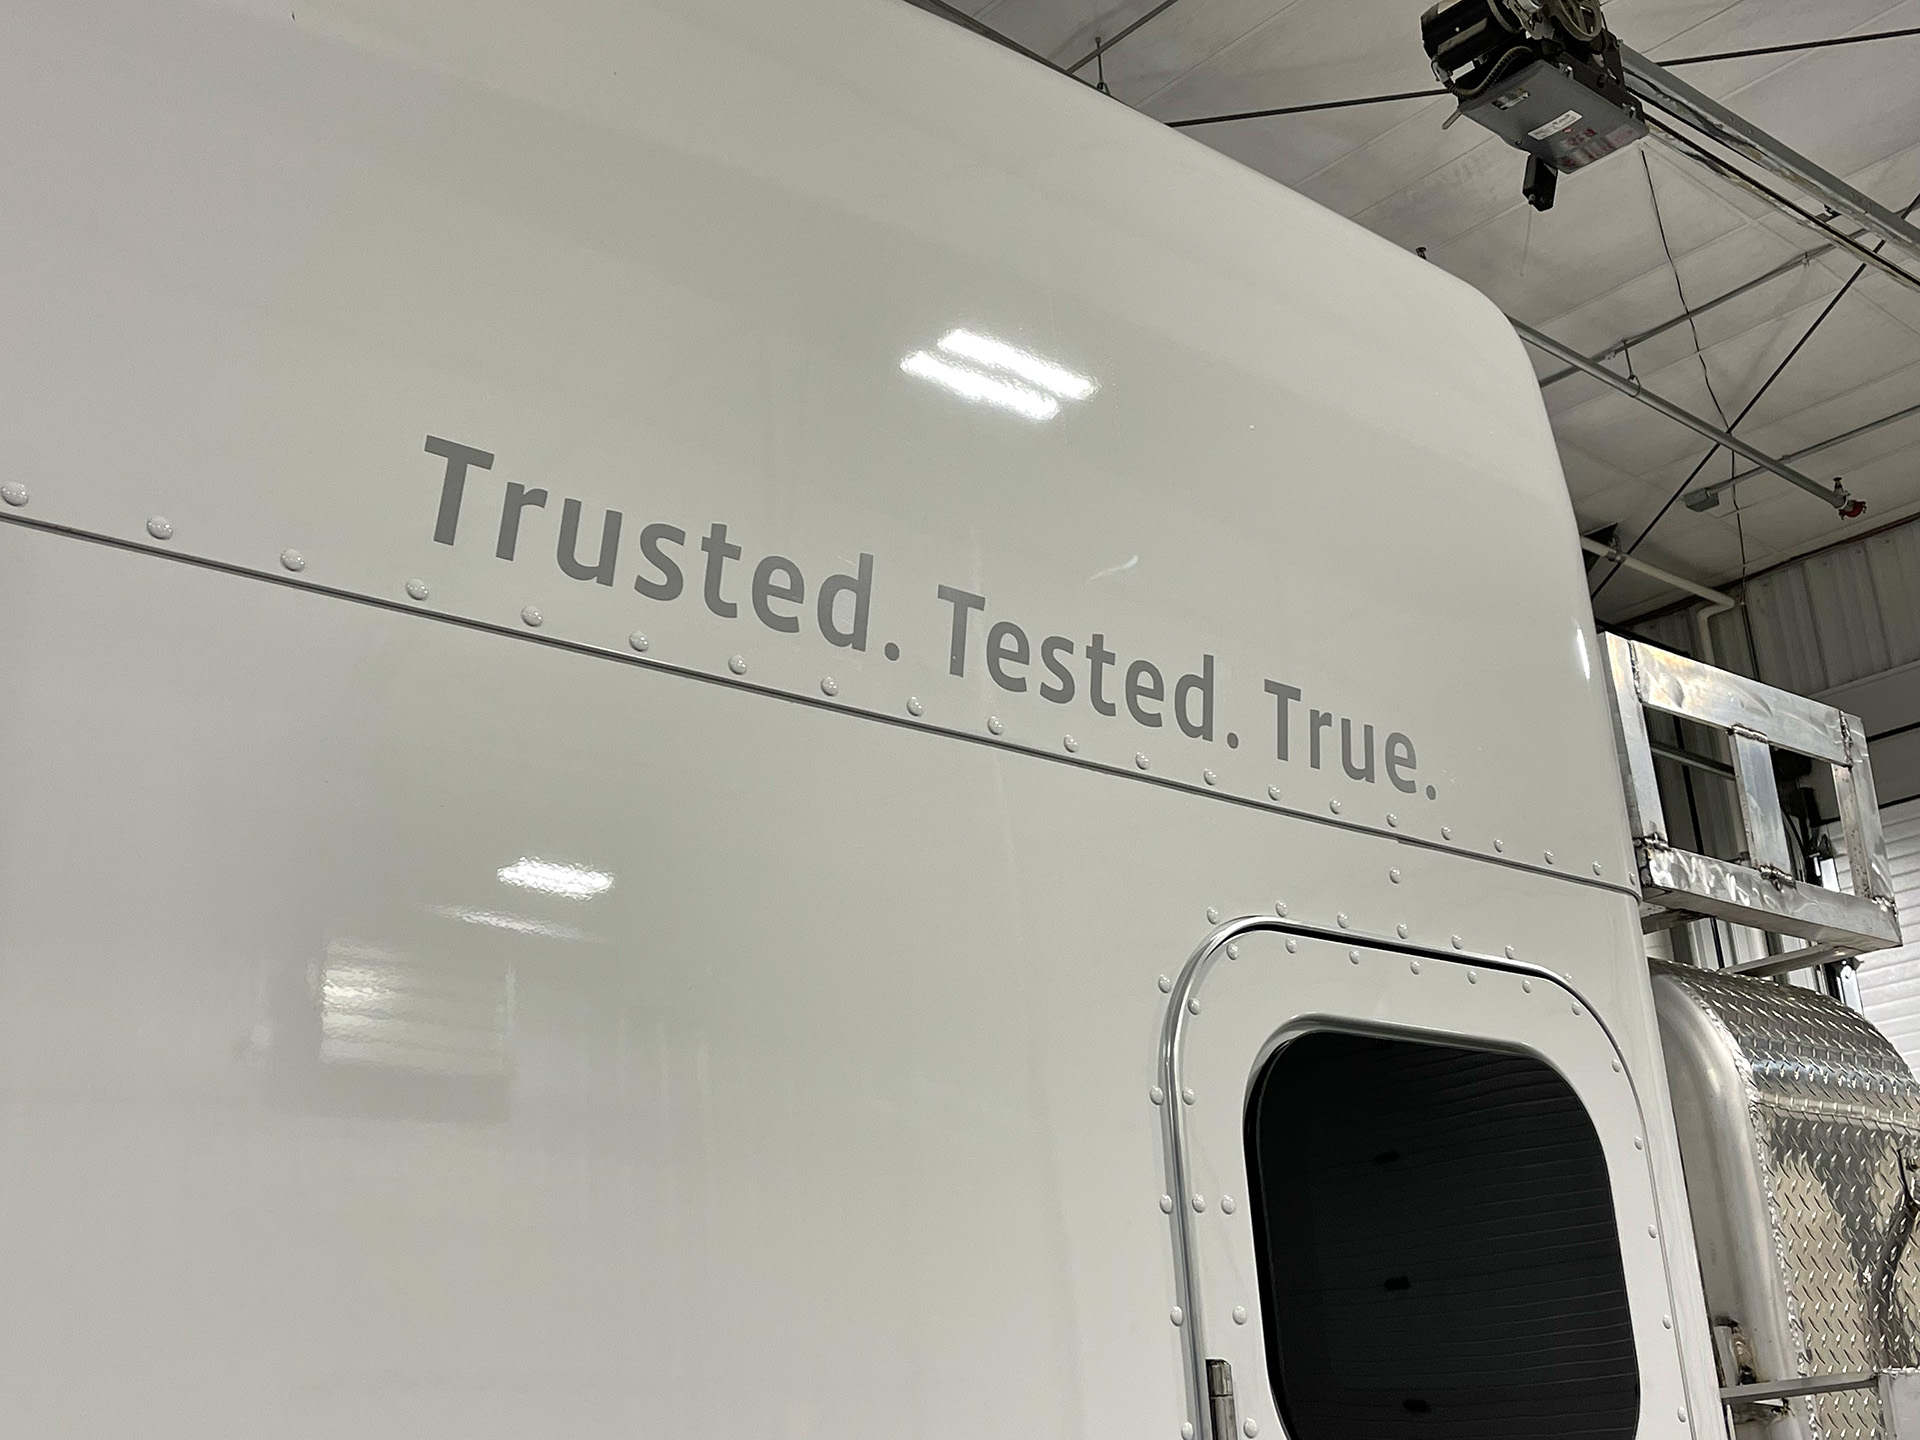 side of a chief carriers semi cab that says "trusted. tested. true."